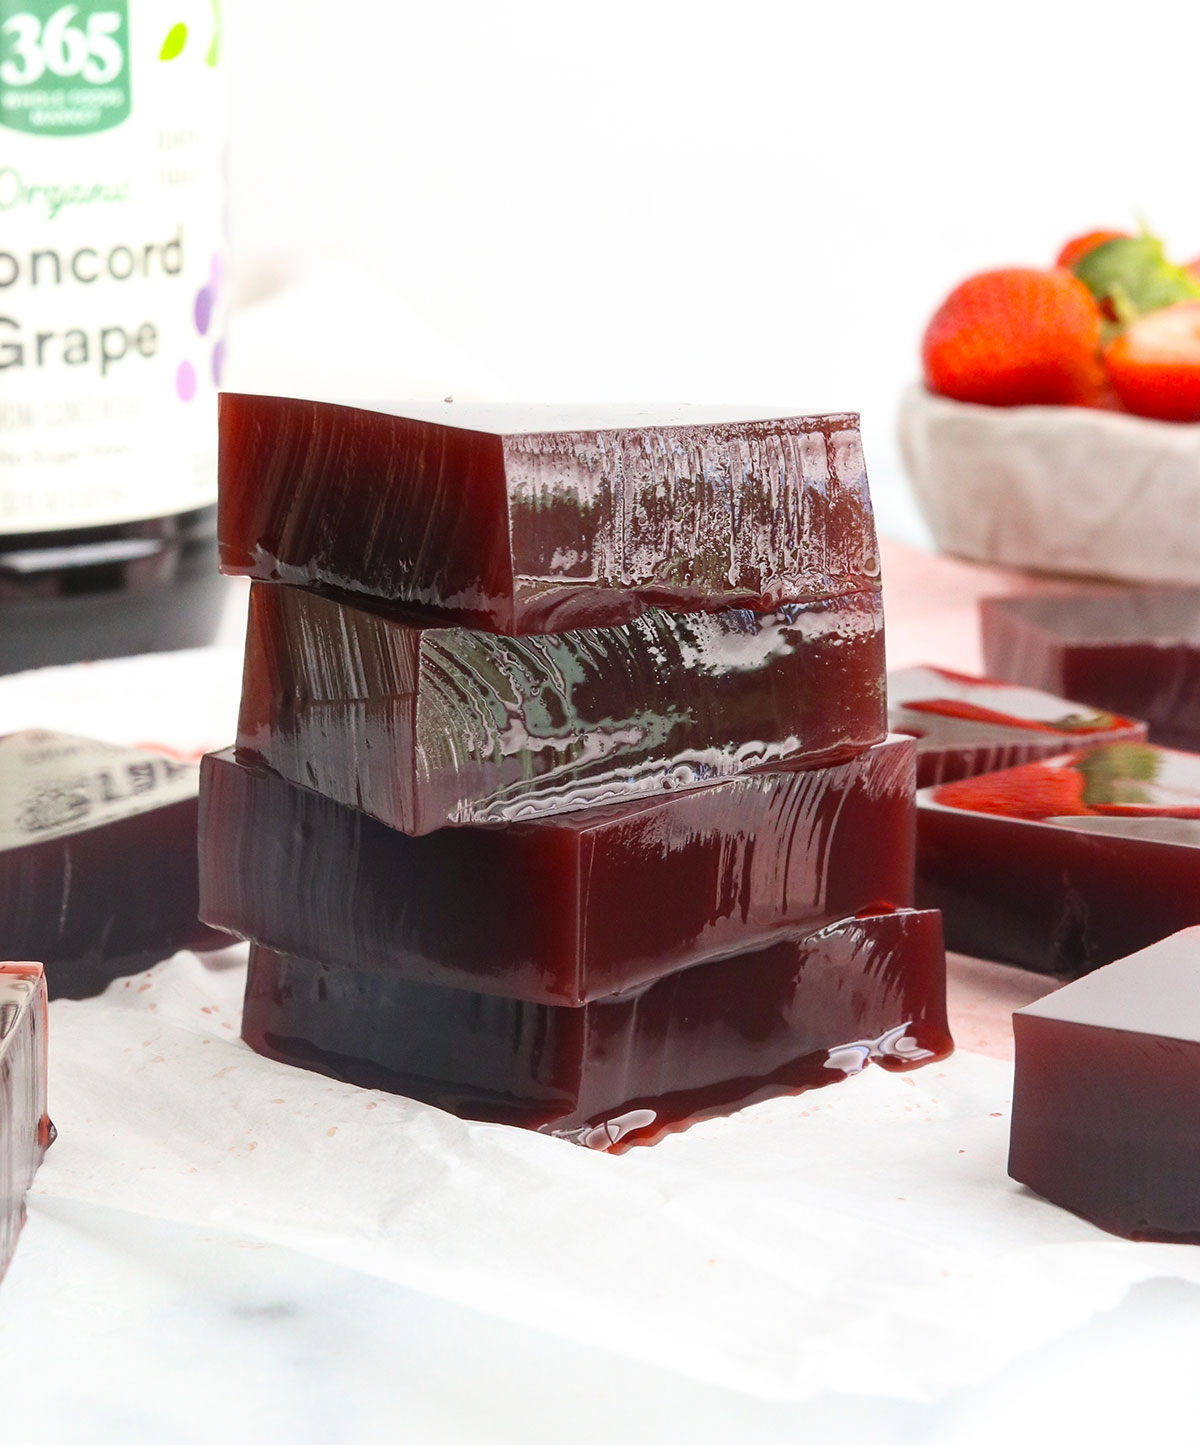 4 squares of vegan jello stacked in front of a grape juice container.